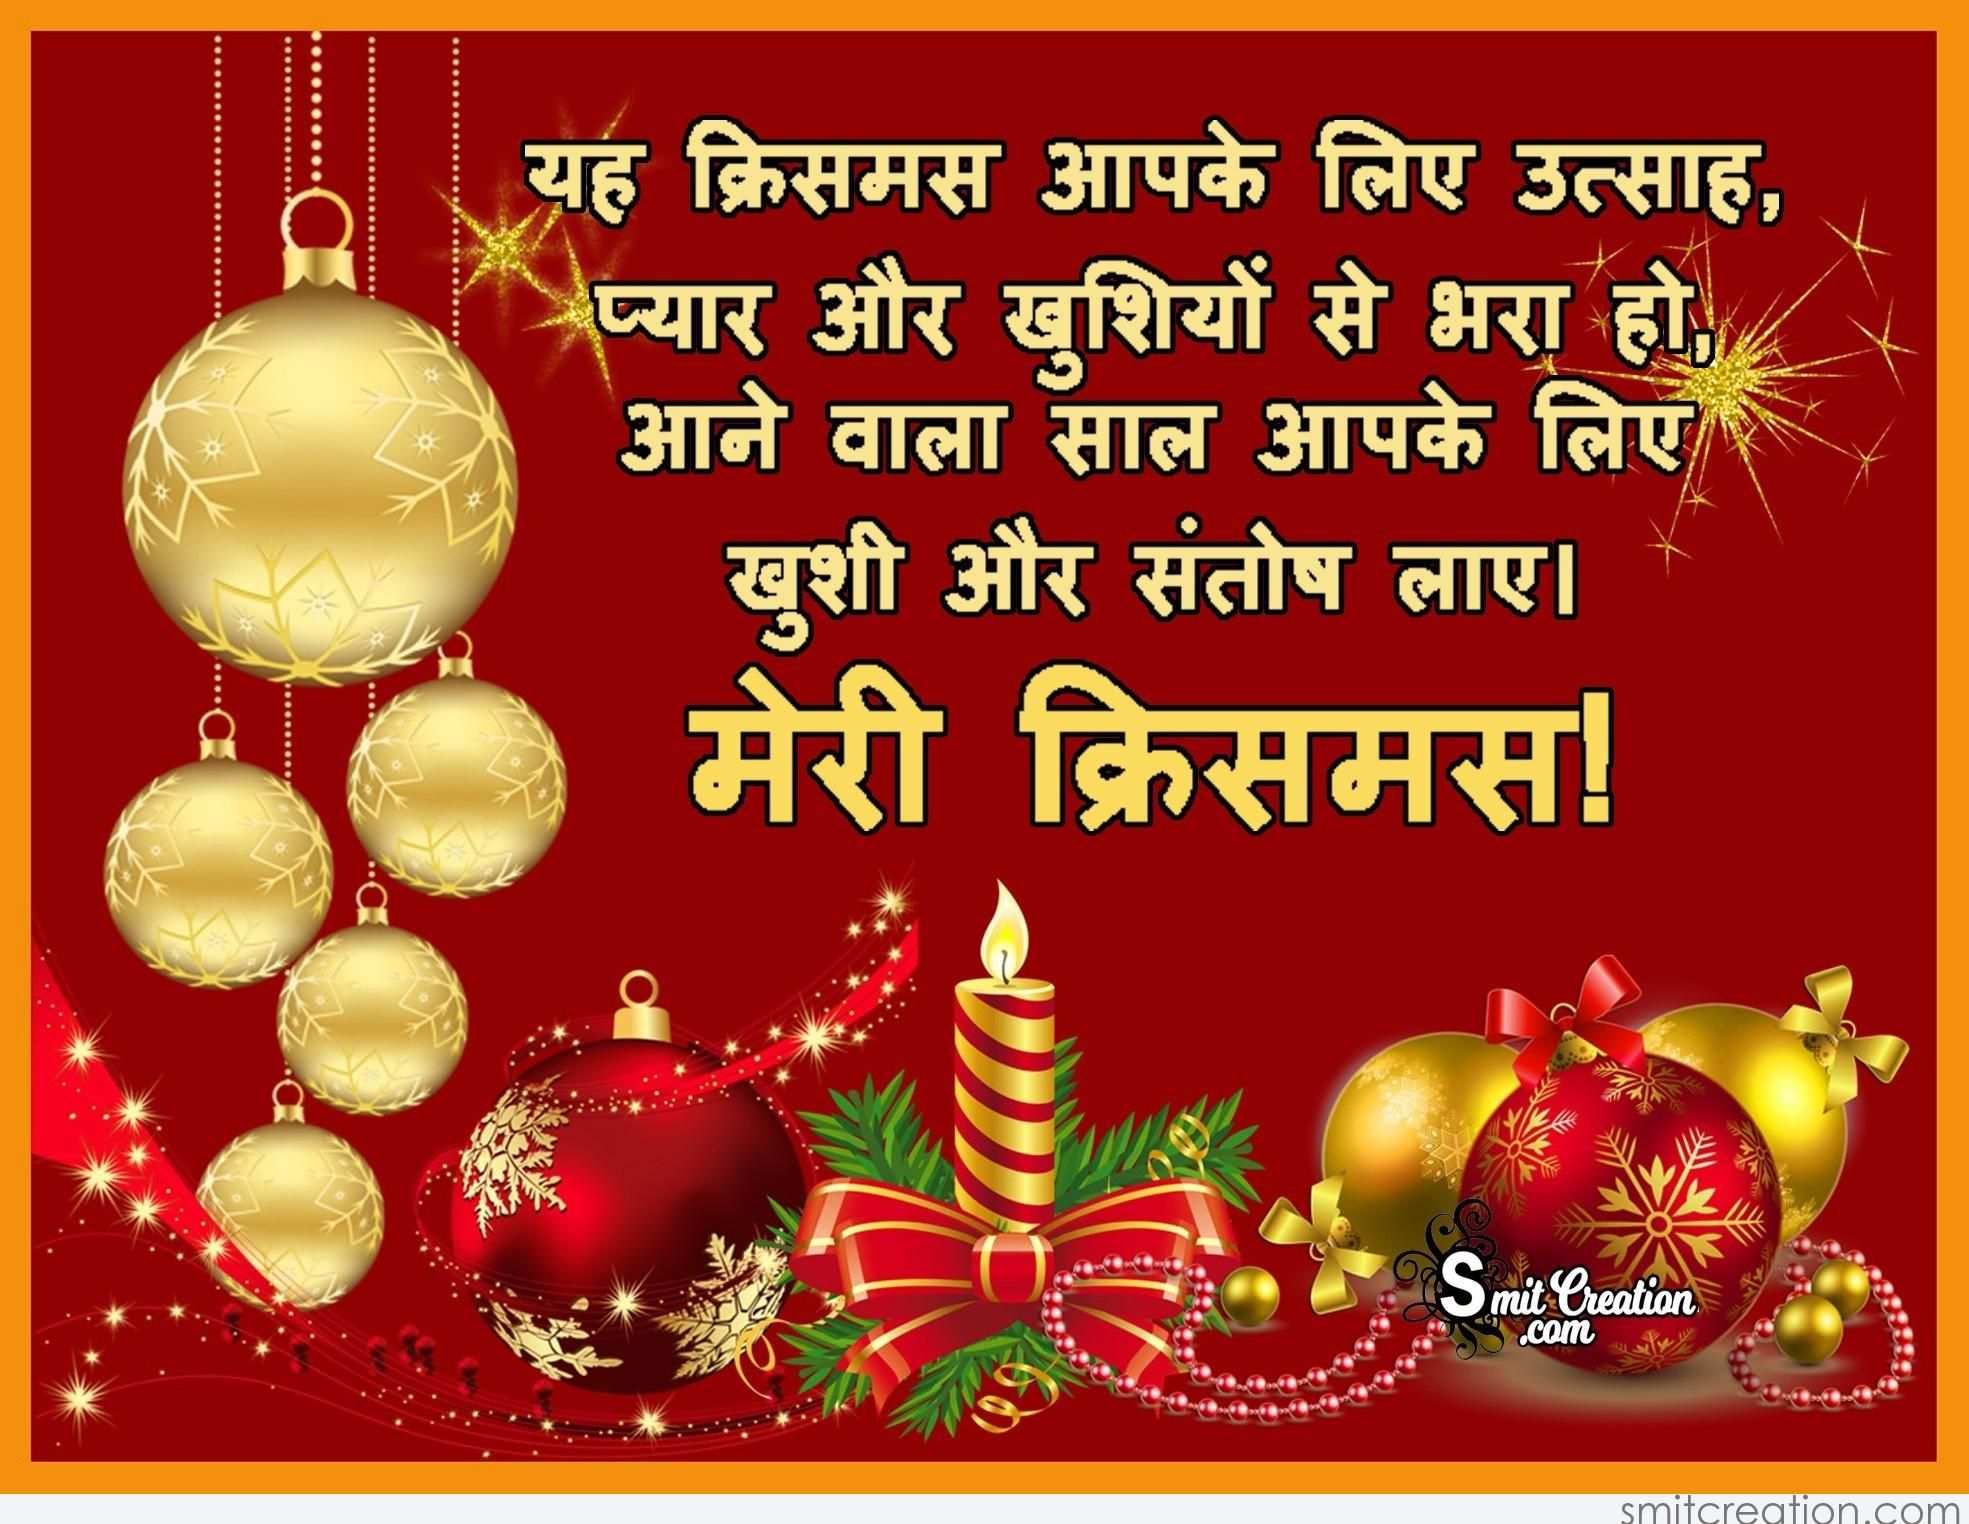 Top Merry Christmas Wishes